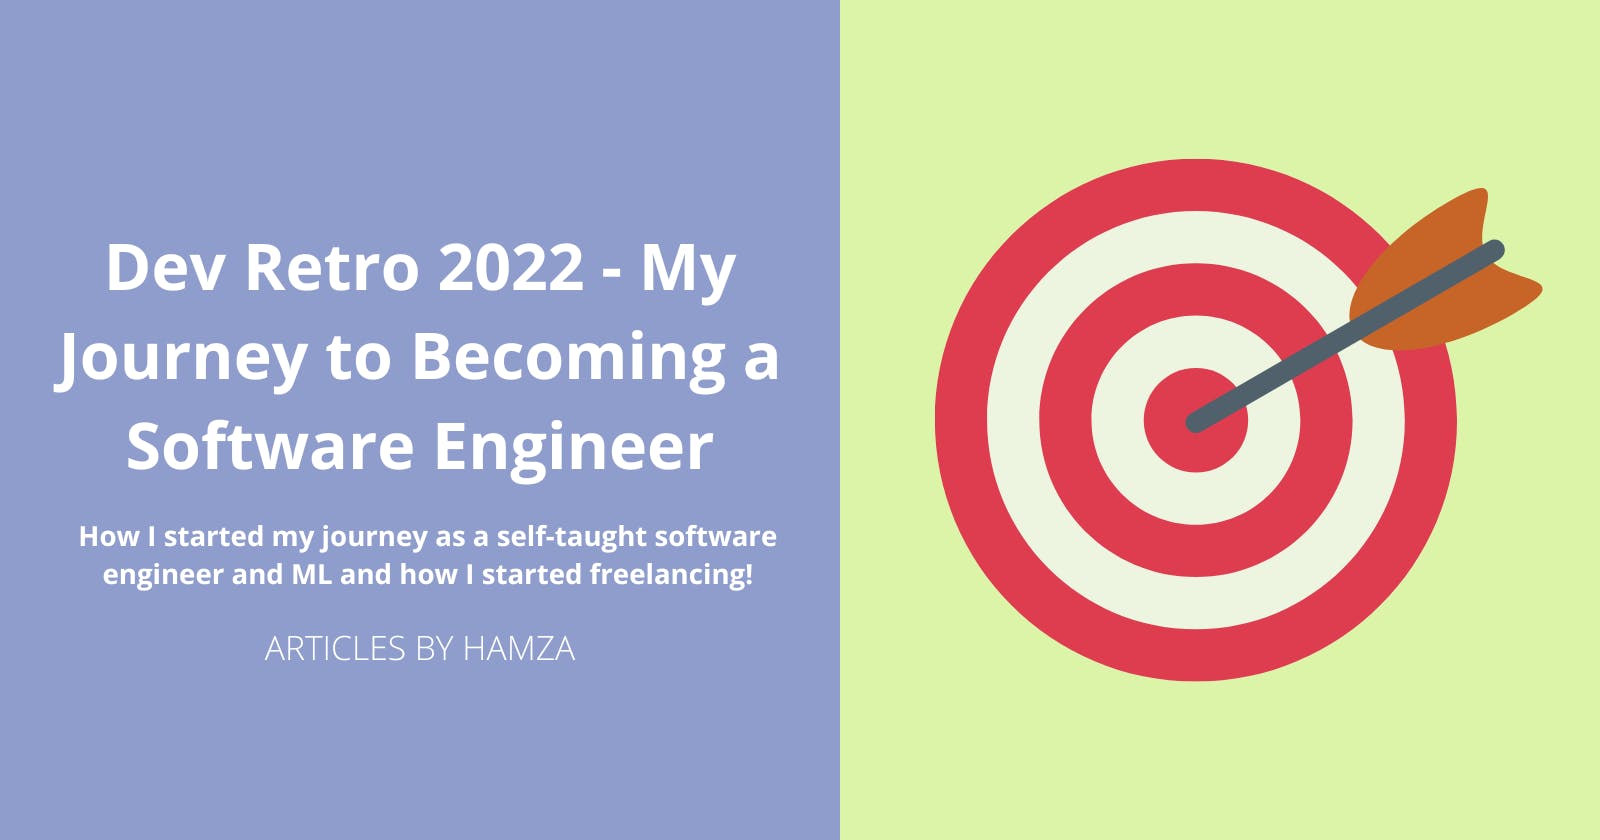 Dev Retro 2022 - My Journey to Becoming a software engineer